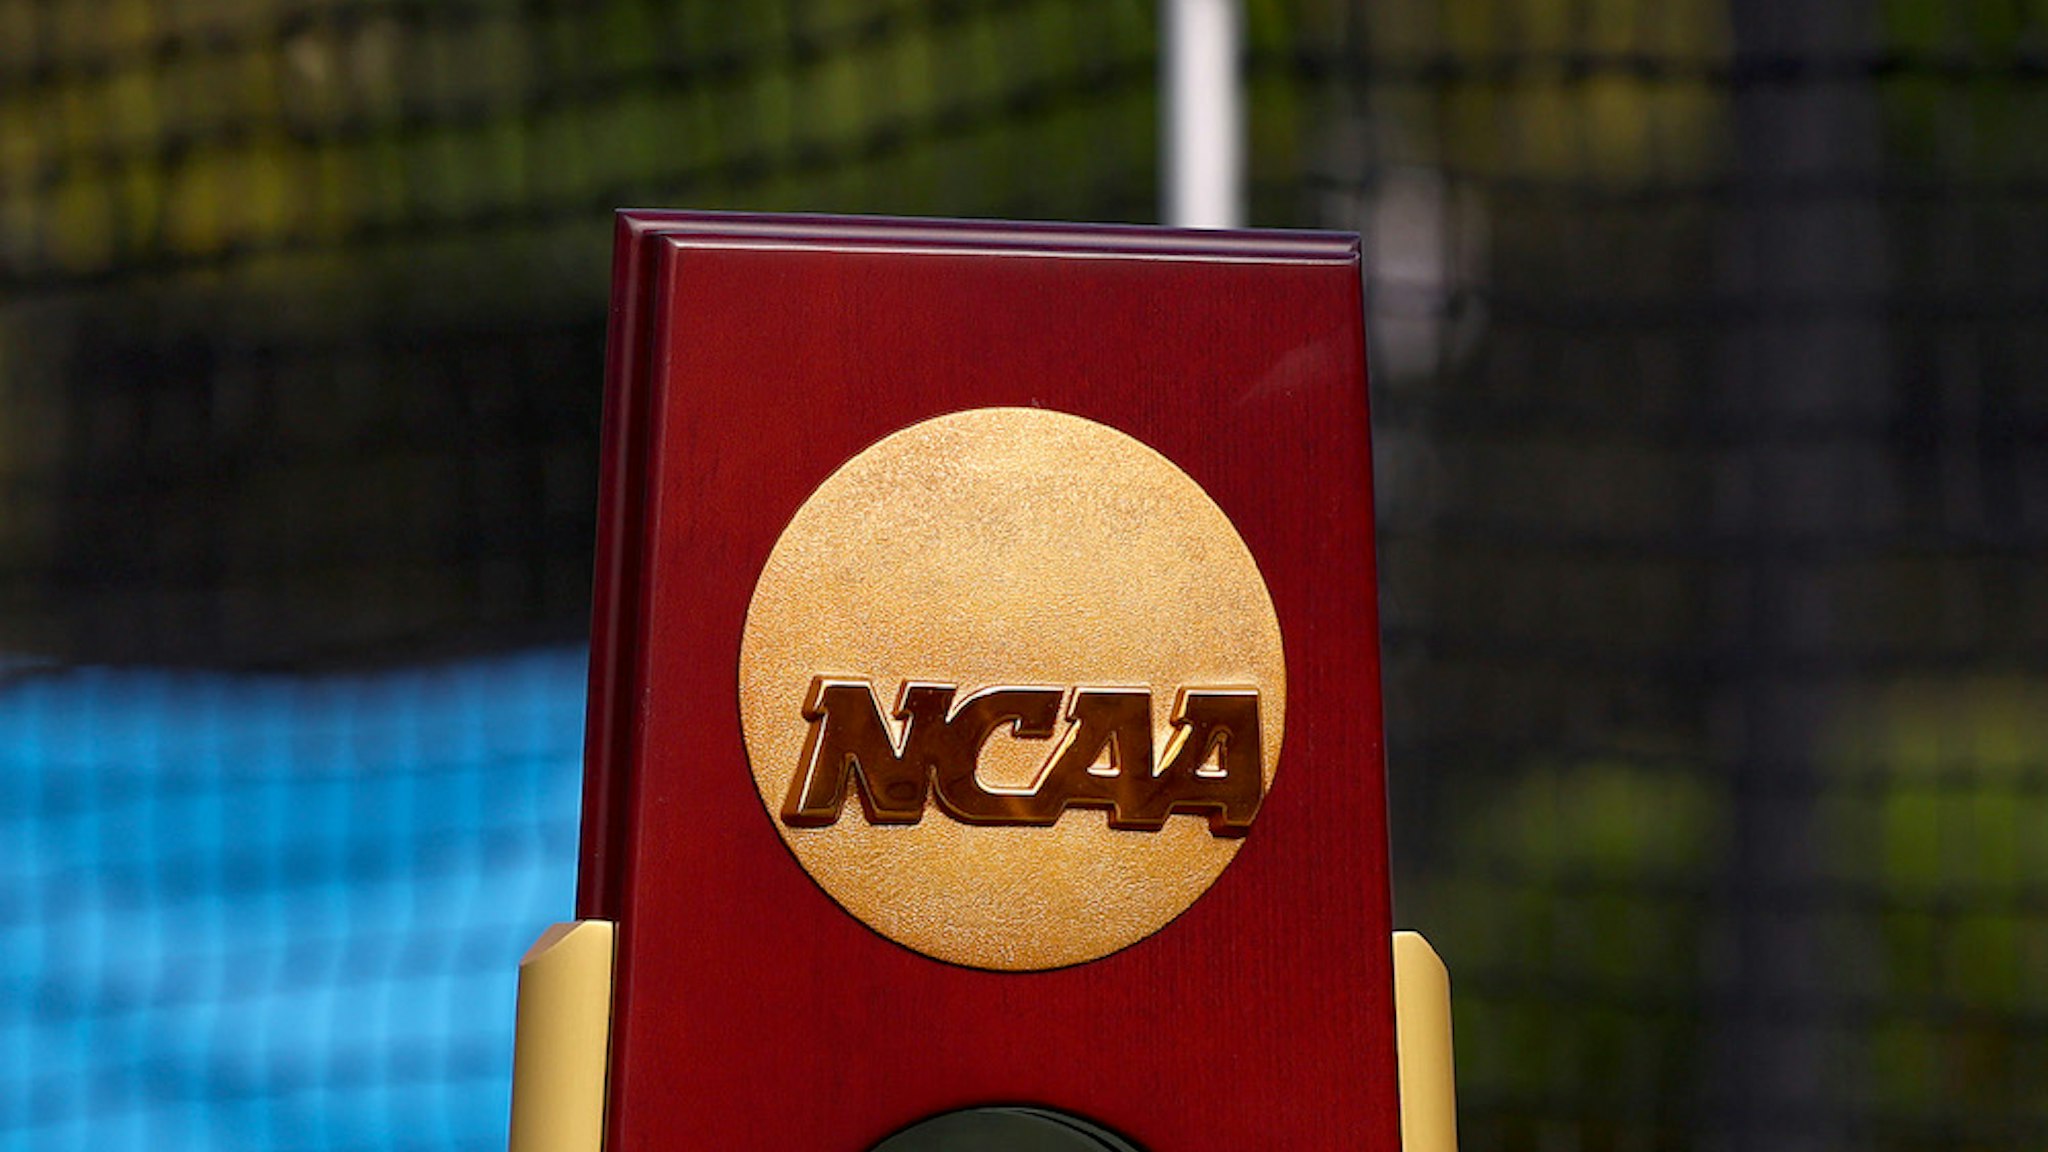 CHATTANOOGA, TN - MAY 26: Detail photo of the championship trophy awarded to the the Emory Eagles after their win against the Wesleyan Cardinals during the Division III Womens Tennis Championship held at the Champions Tennis Club on May 26, 2021 in Chattanooga, Tennessee. (Photo by Grant Halverson/NCAA Photos via Getty Images)